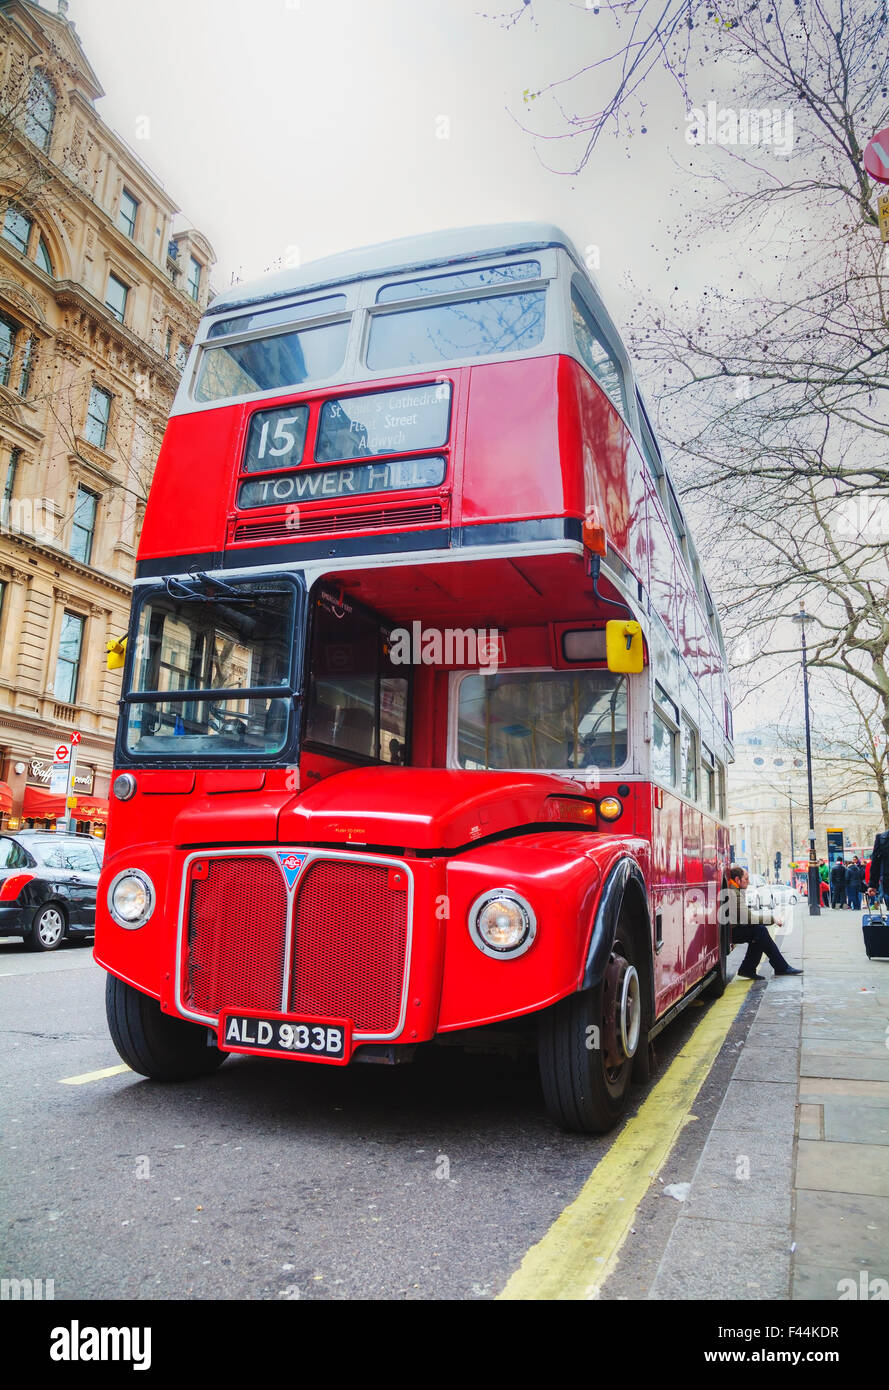 Iconic red double decker bus in London Stock Photo